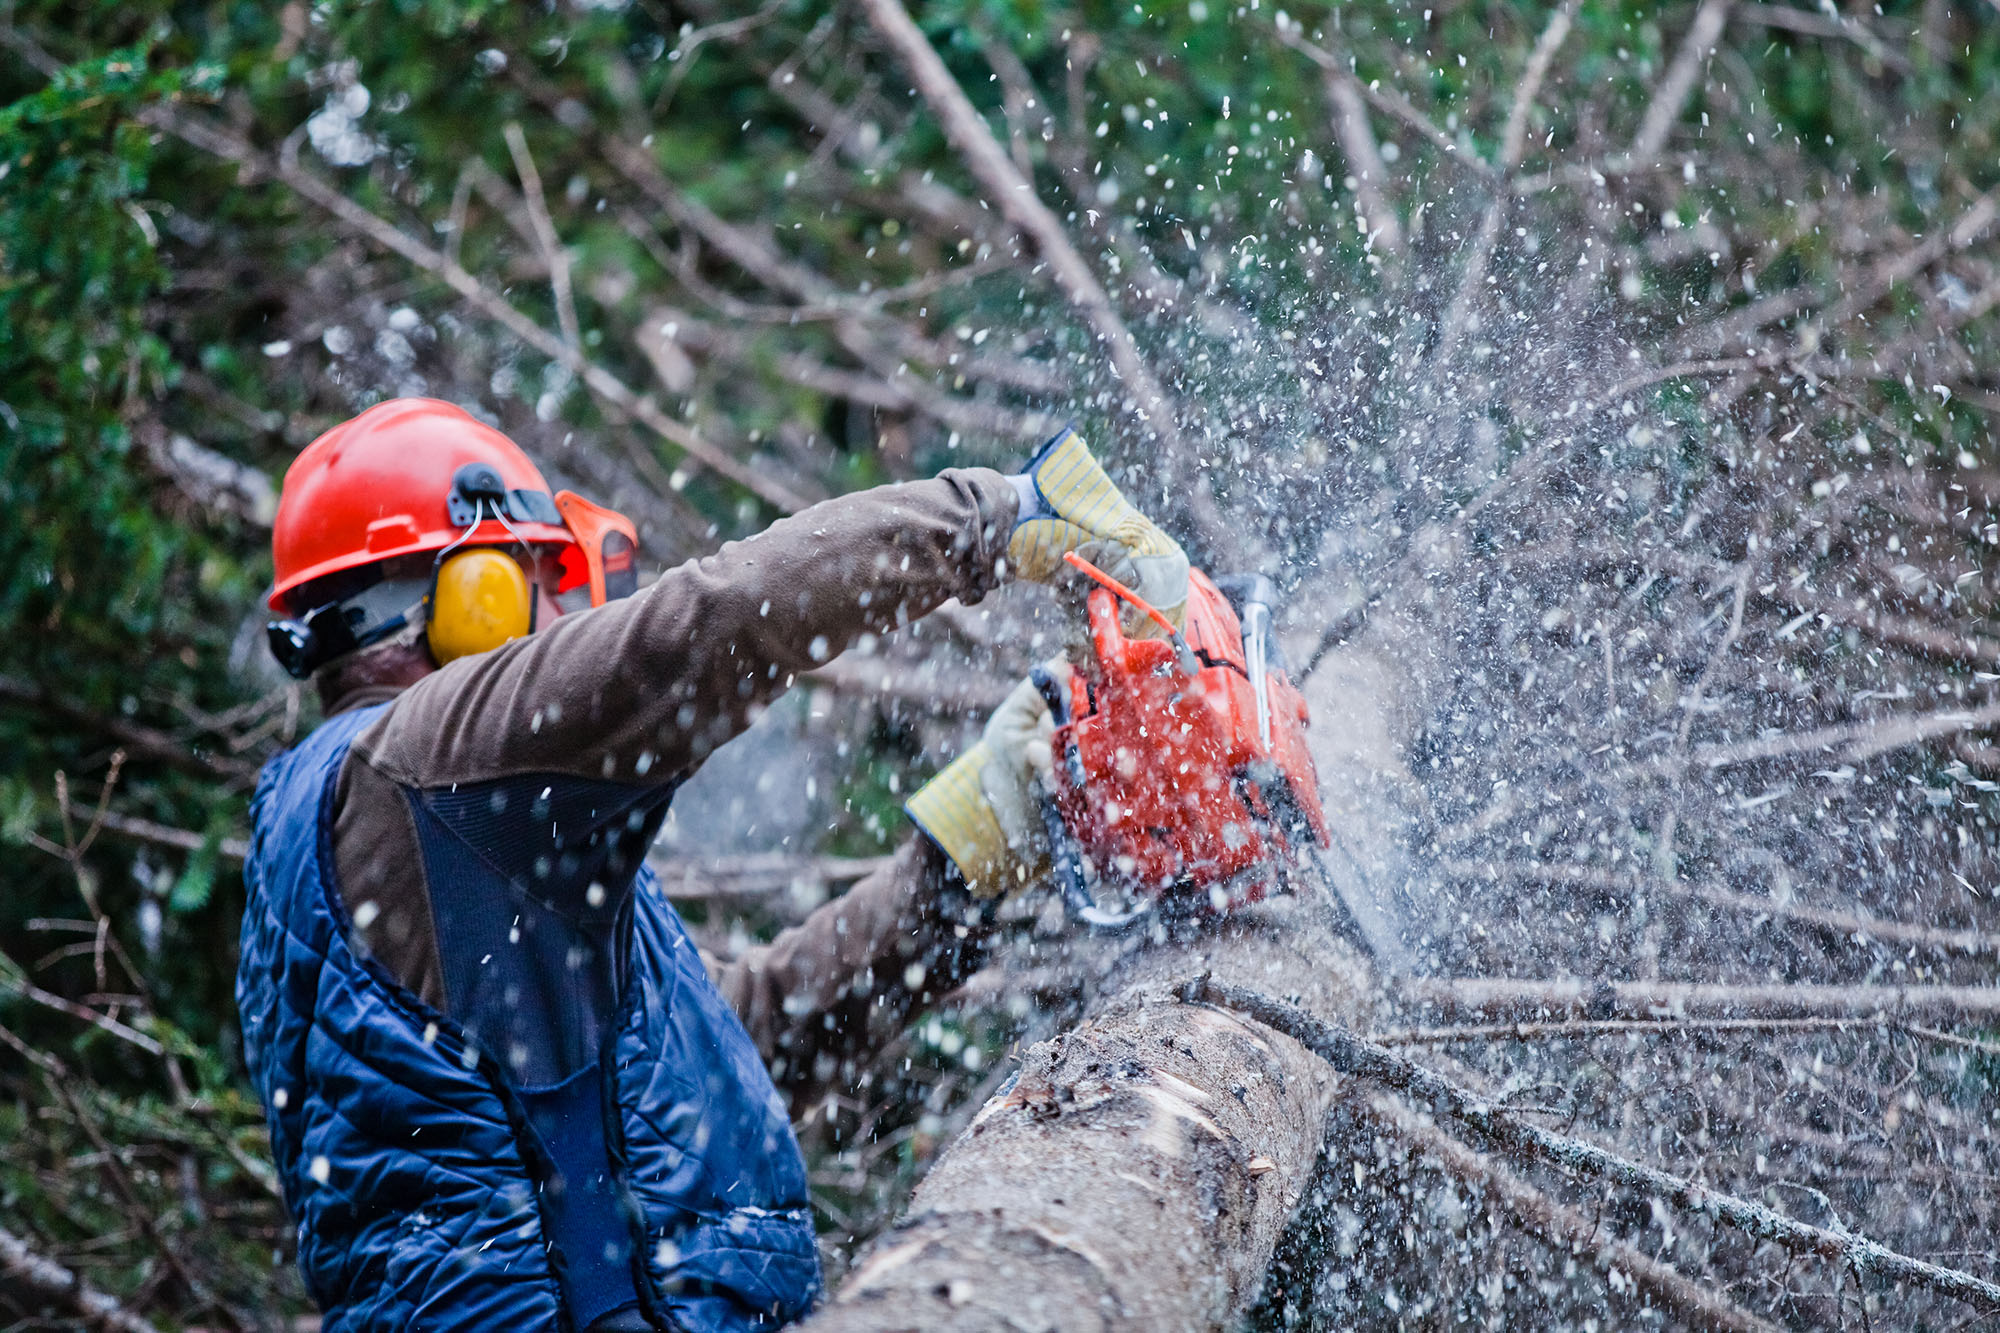 Commerical Tree Services Largo Near Me